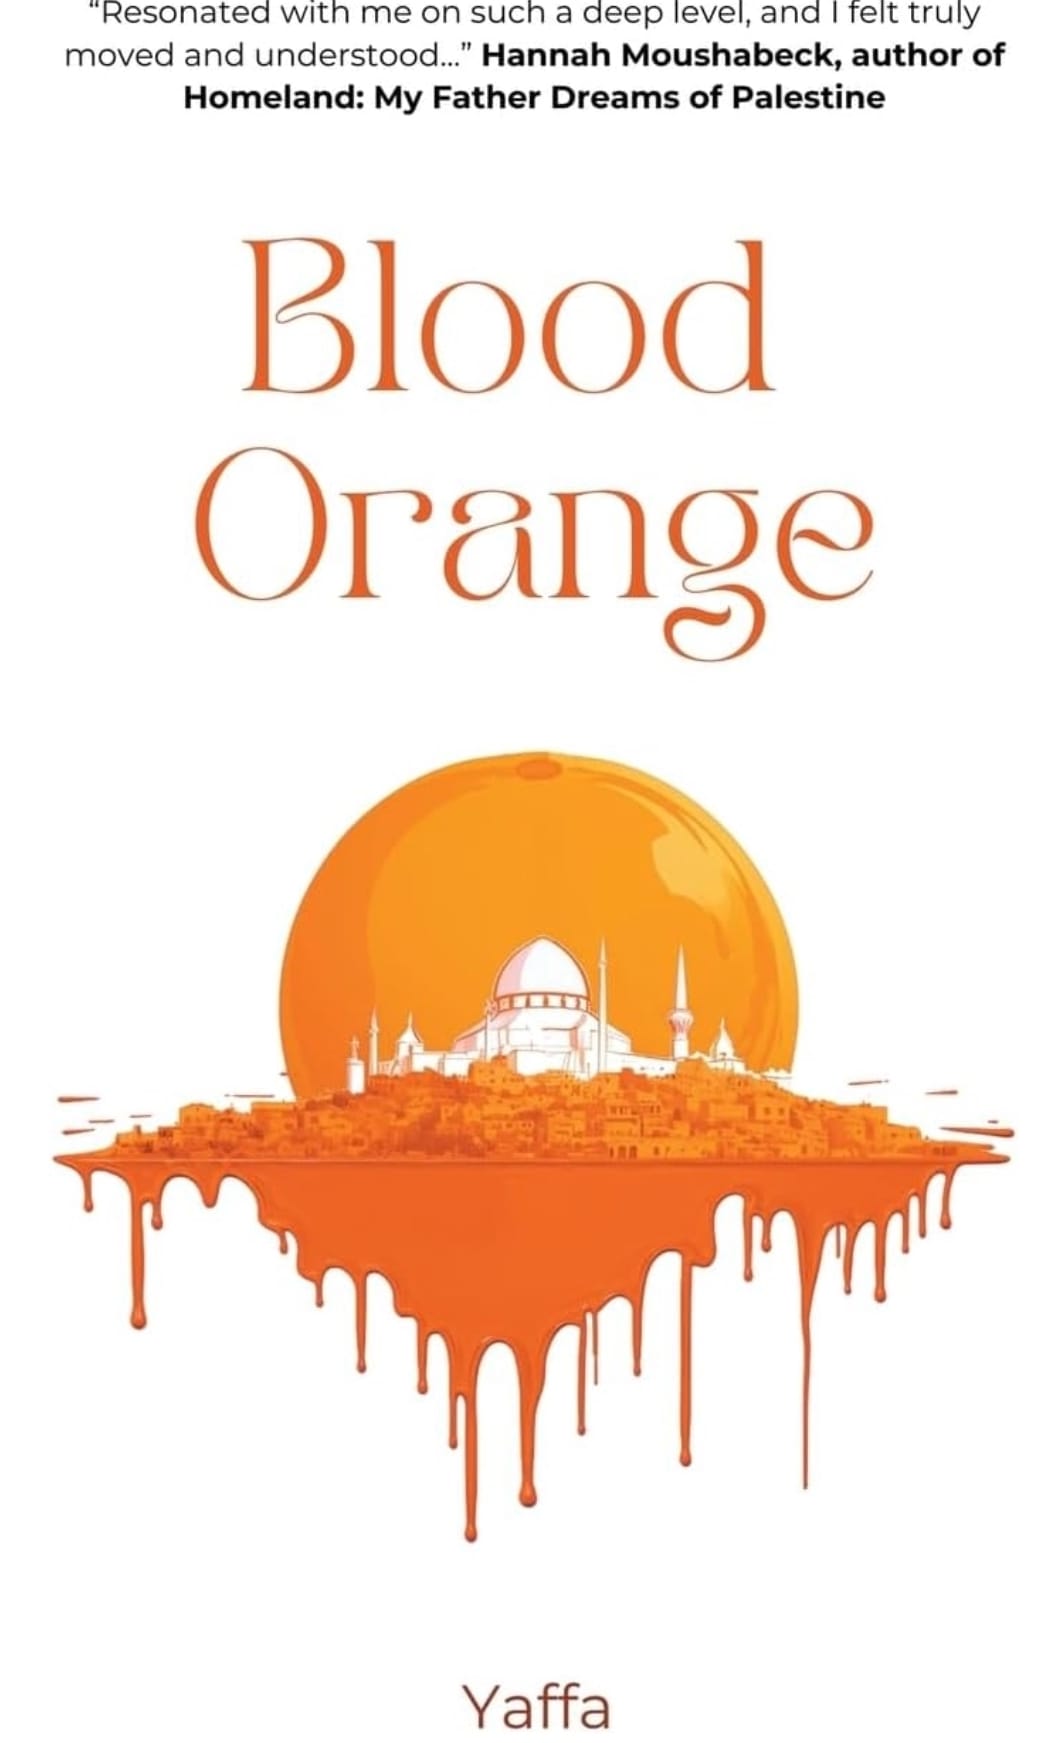 'Blood Orange': Mx. Yaffa's Ode to a Free Palestine and Poetic Resistance